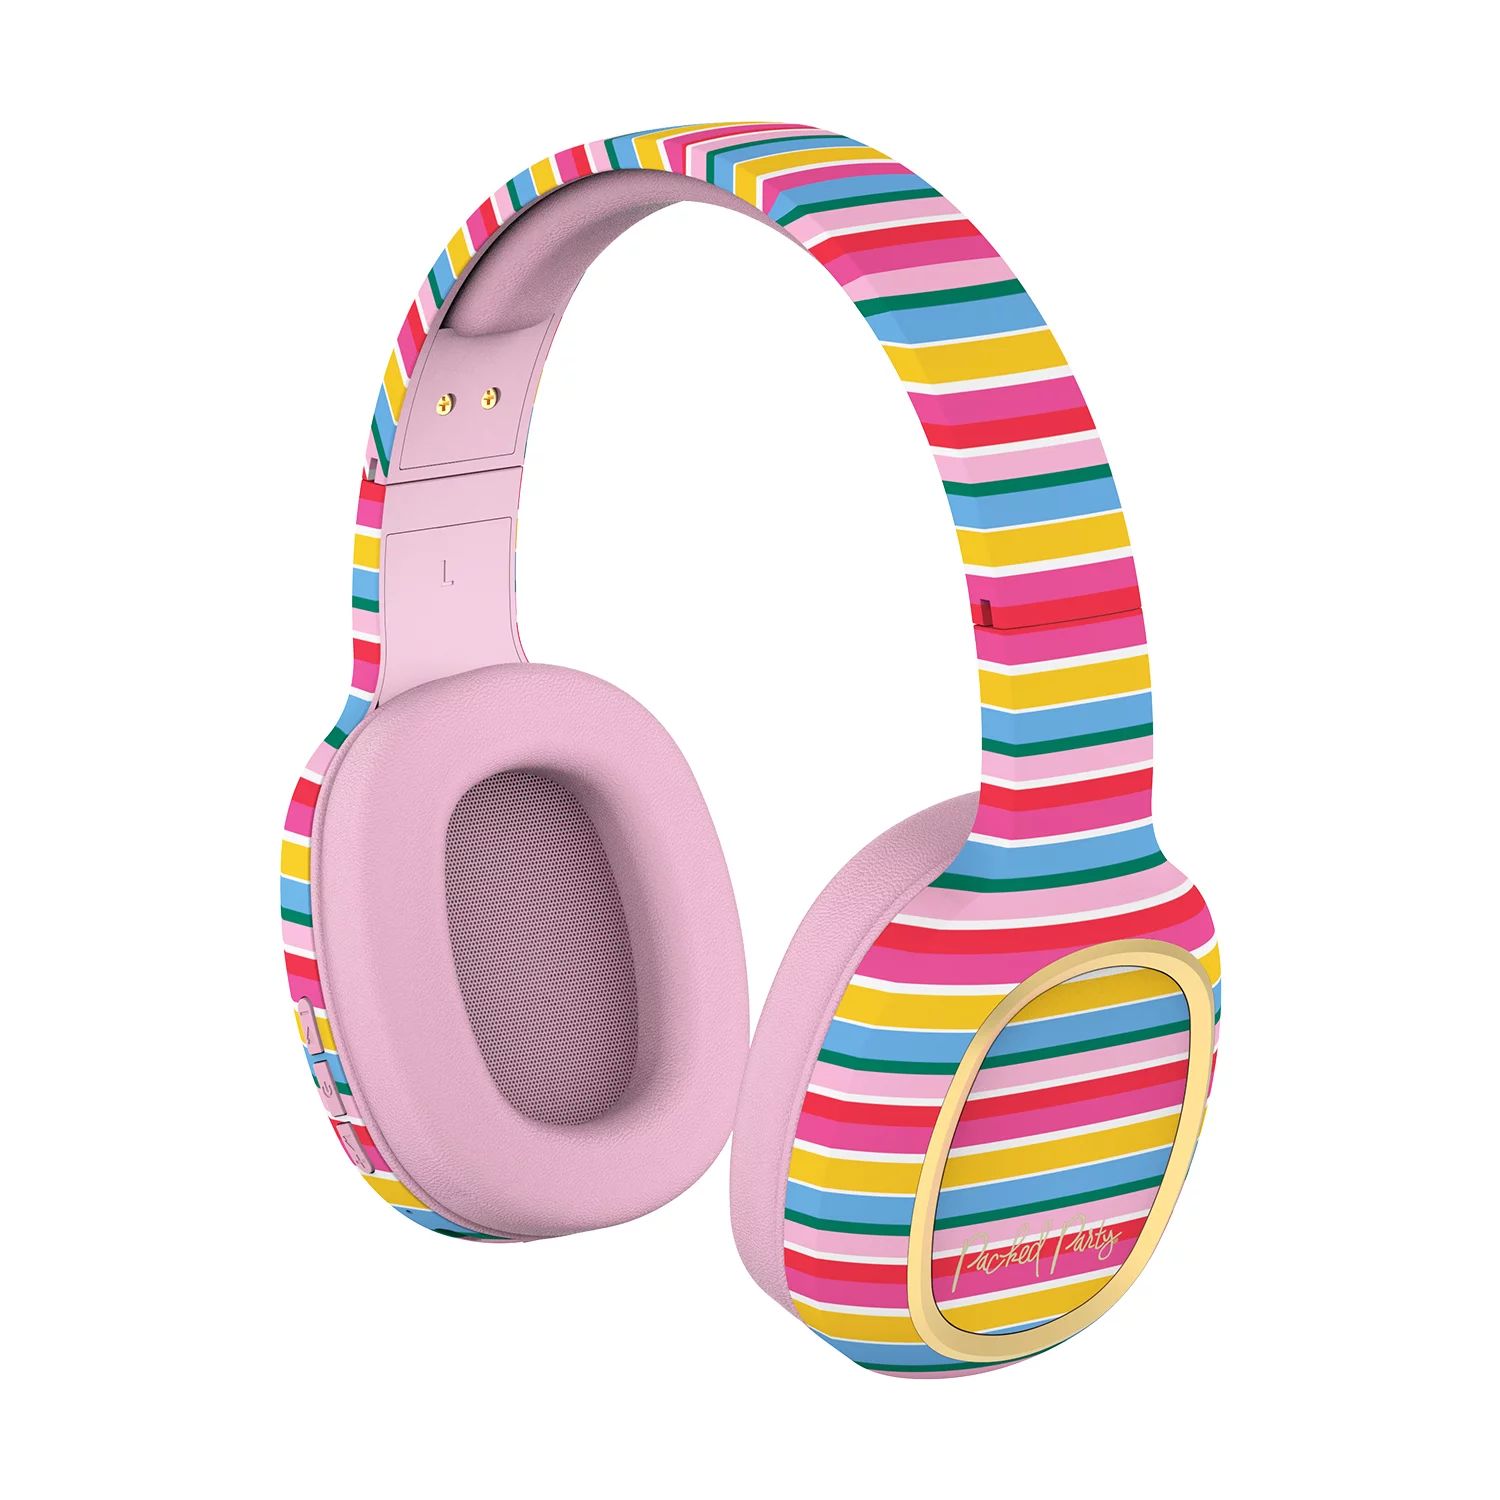 Packed Party "More Color More Fun" Bluetooth Wireless Headphones | Walmart (US)